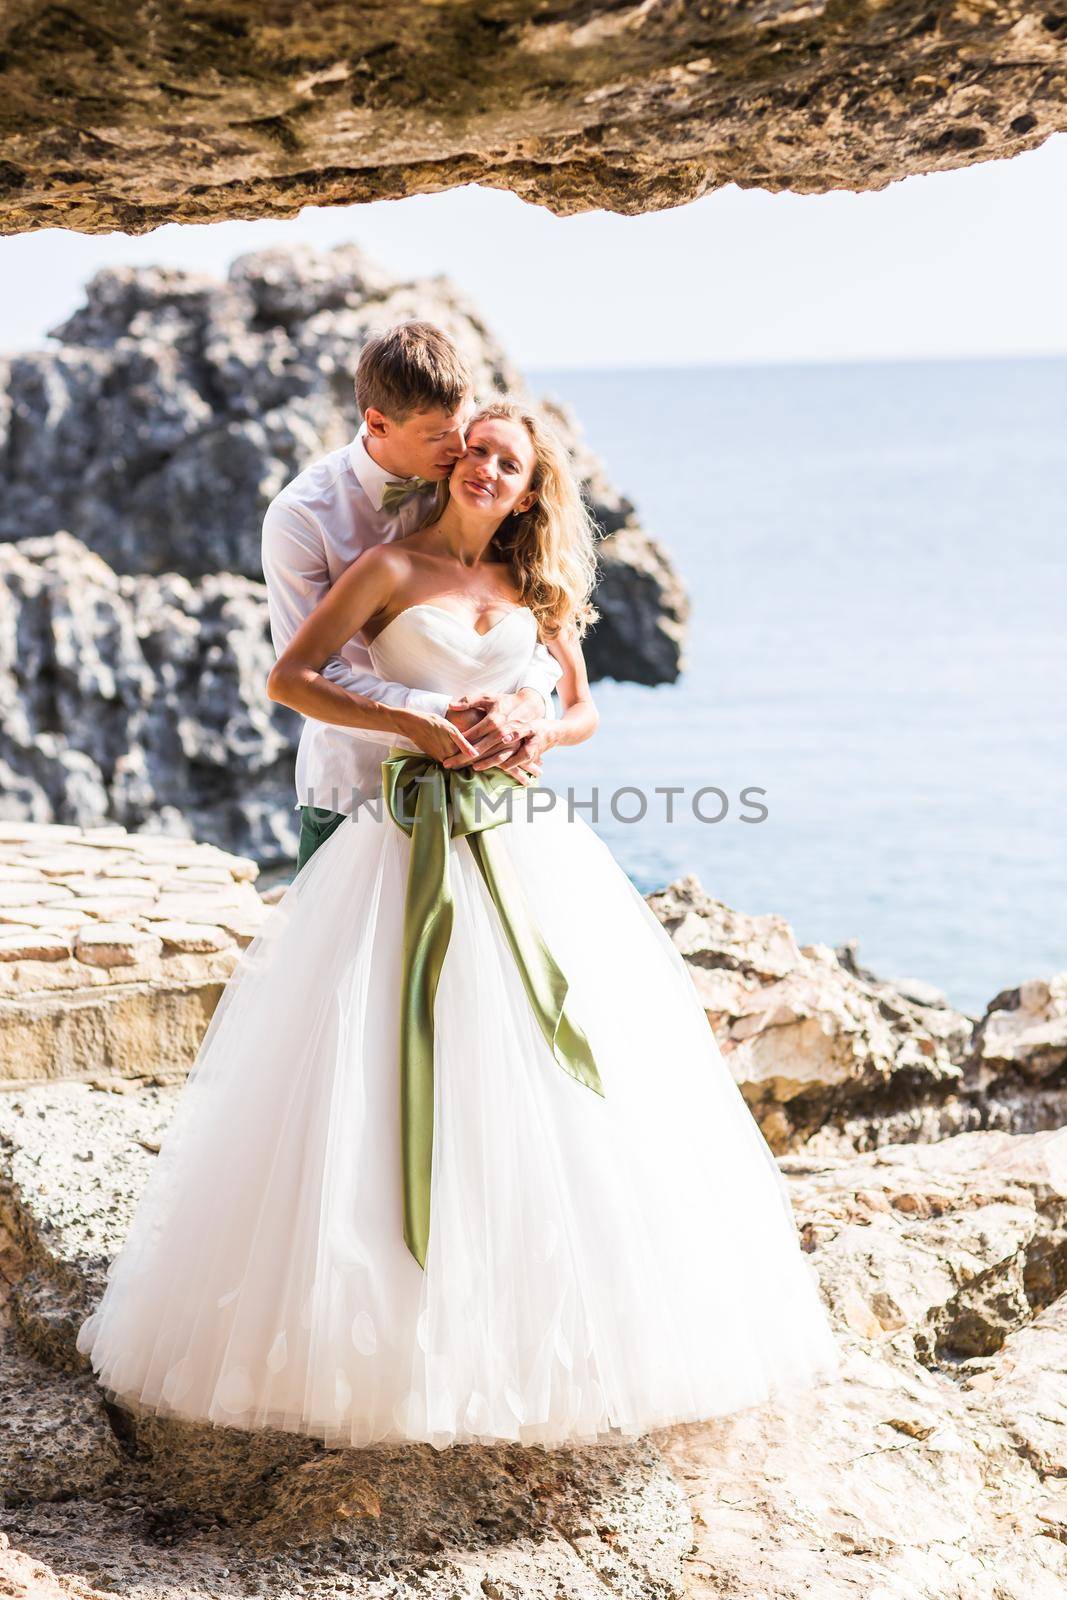 Sensual portrait of a young newlywed couple. Bride and groom outdoor.